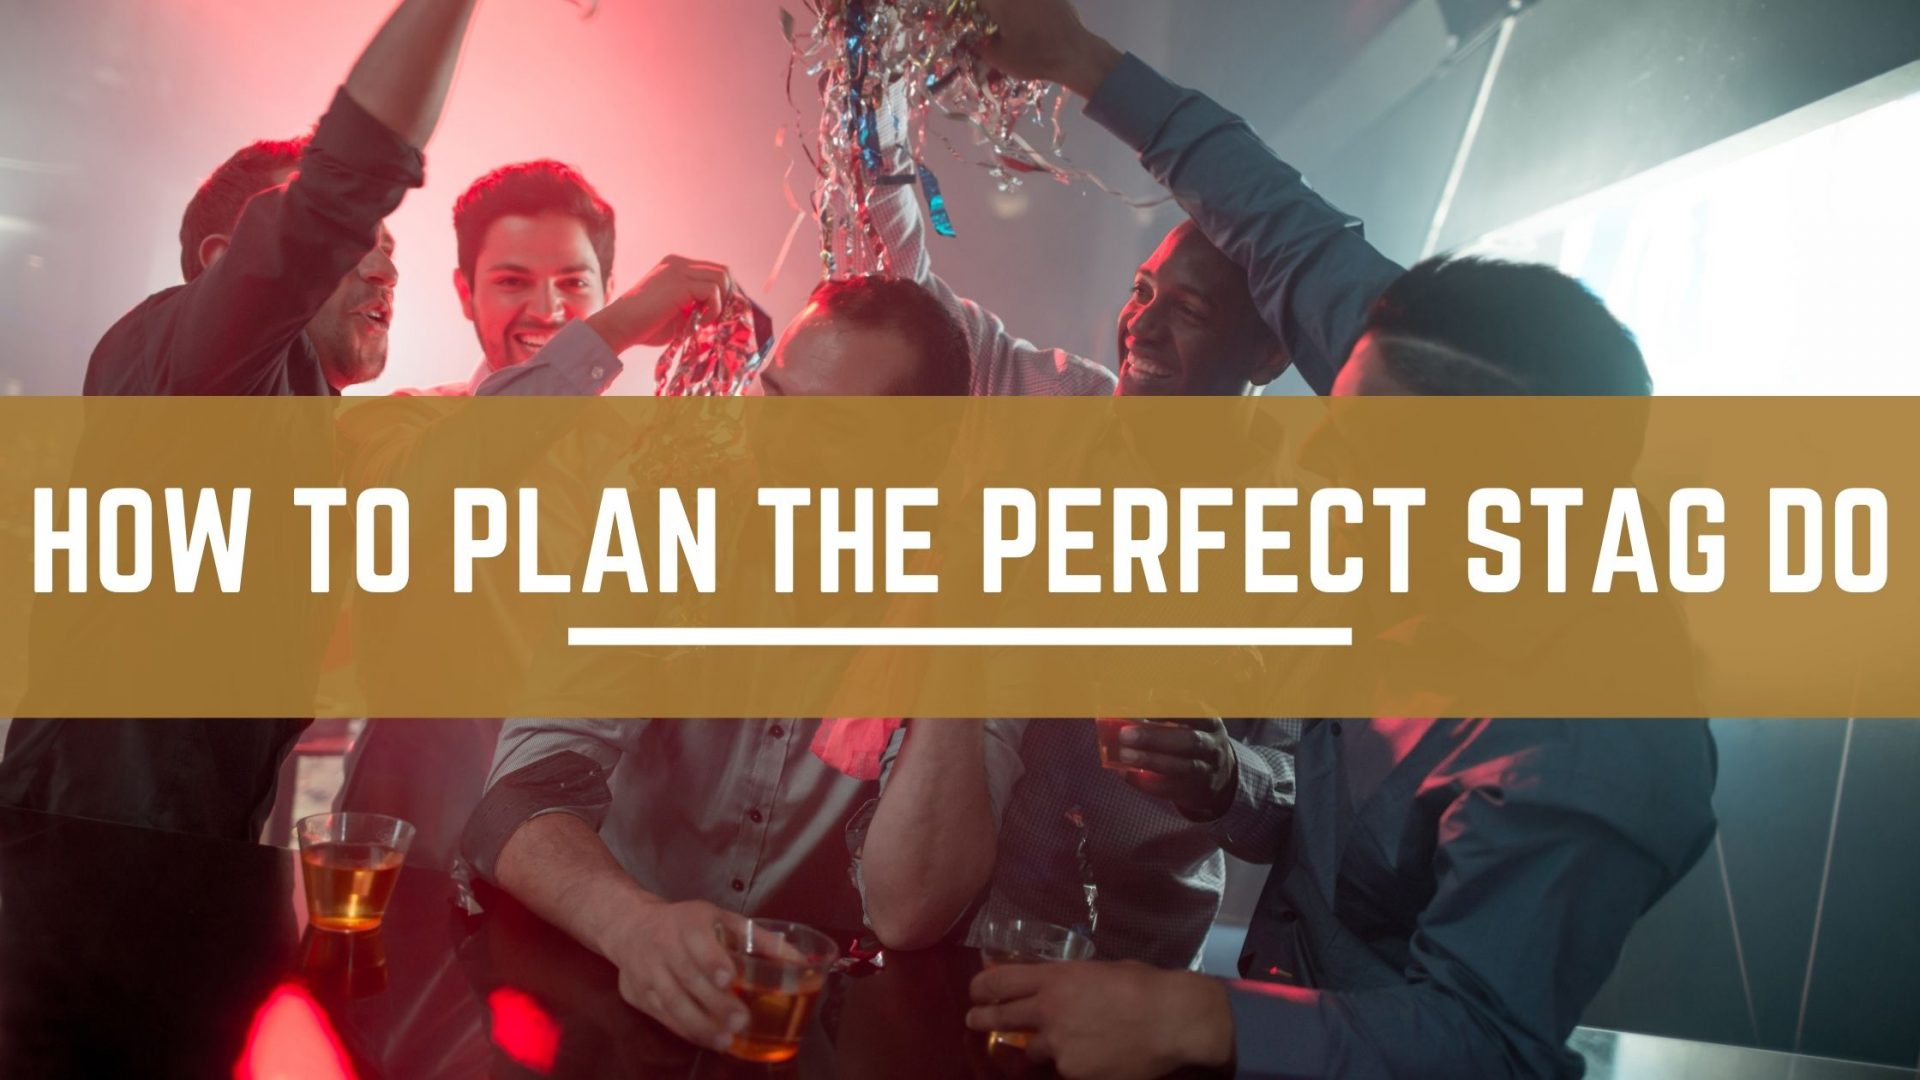 How to Plan the Perfect Stag Do